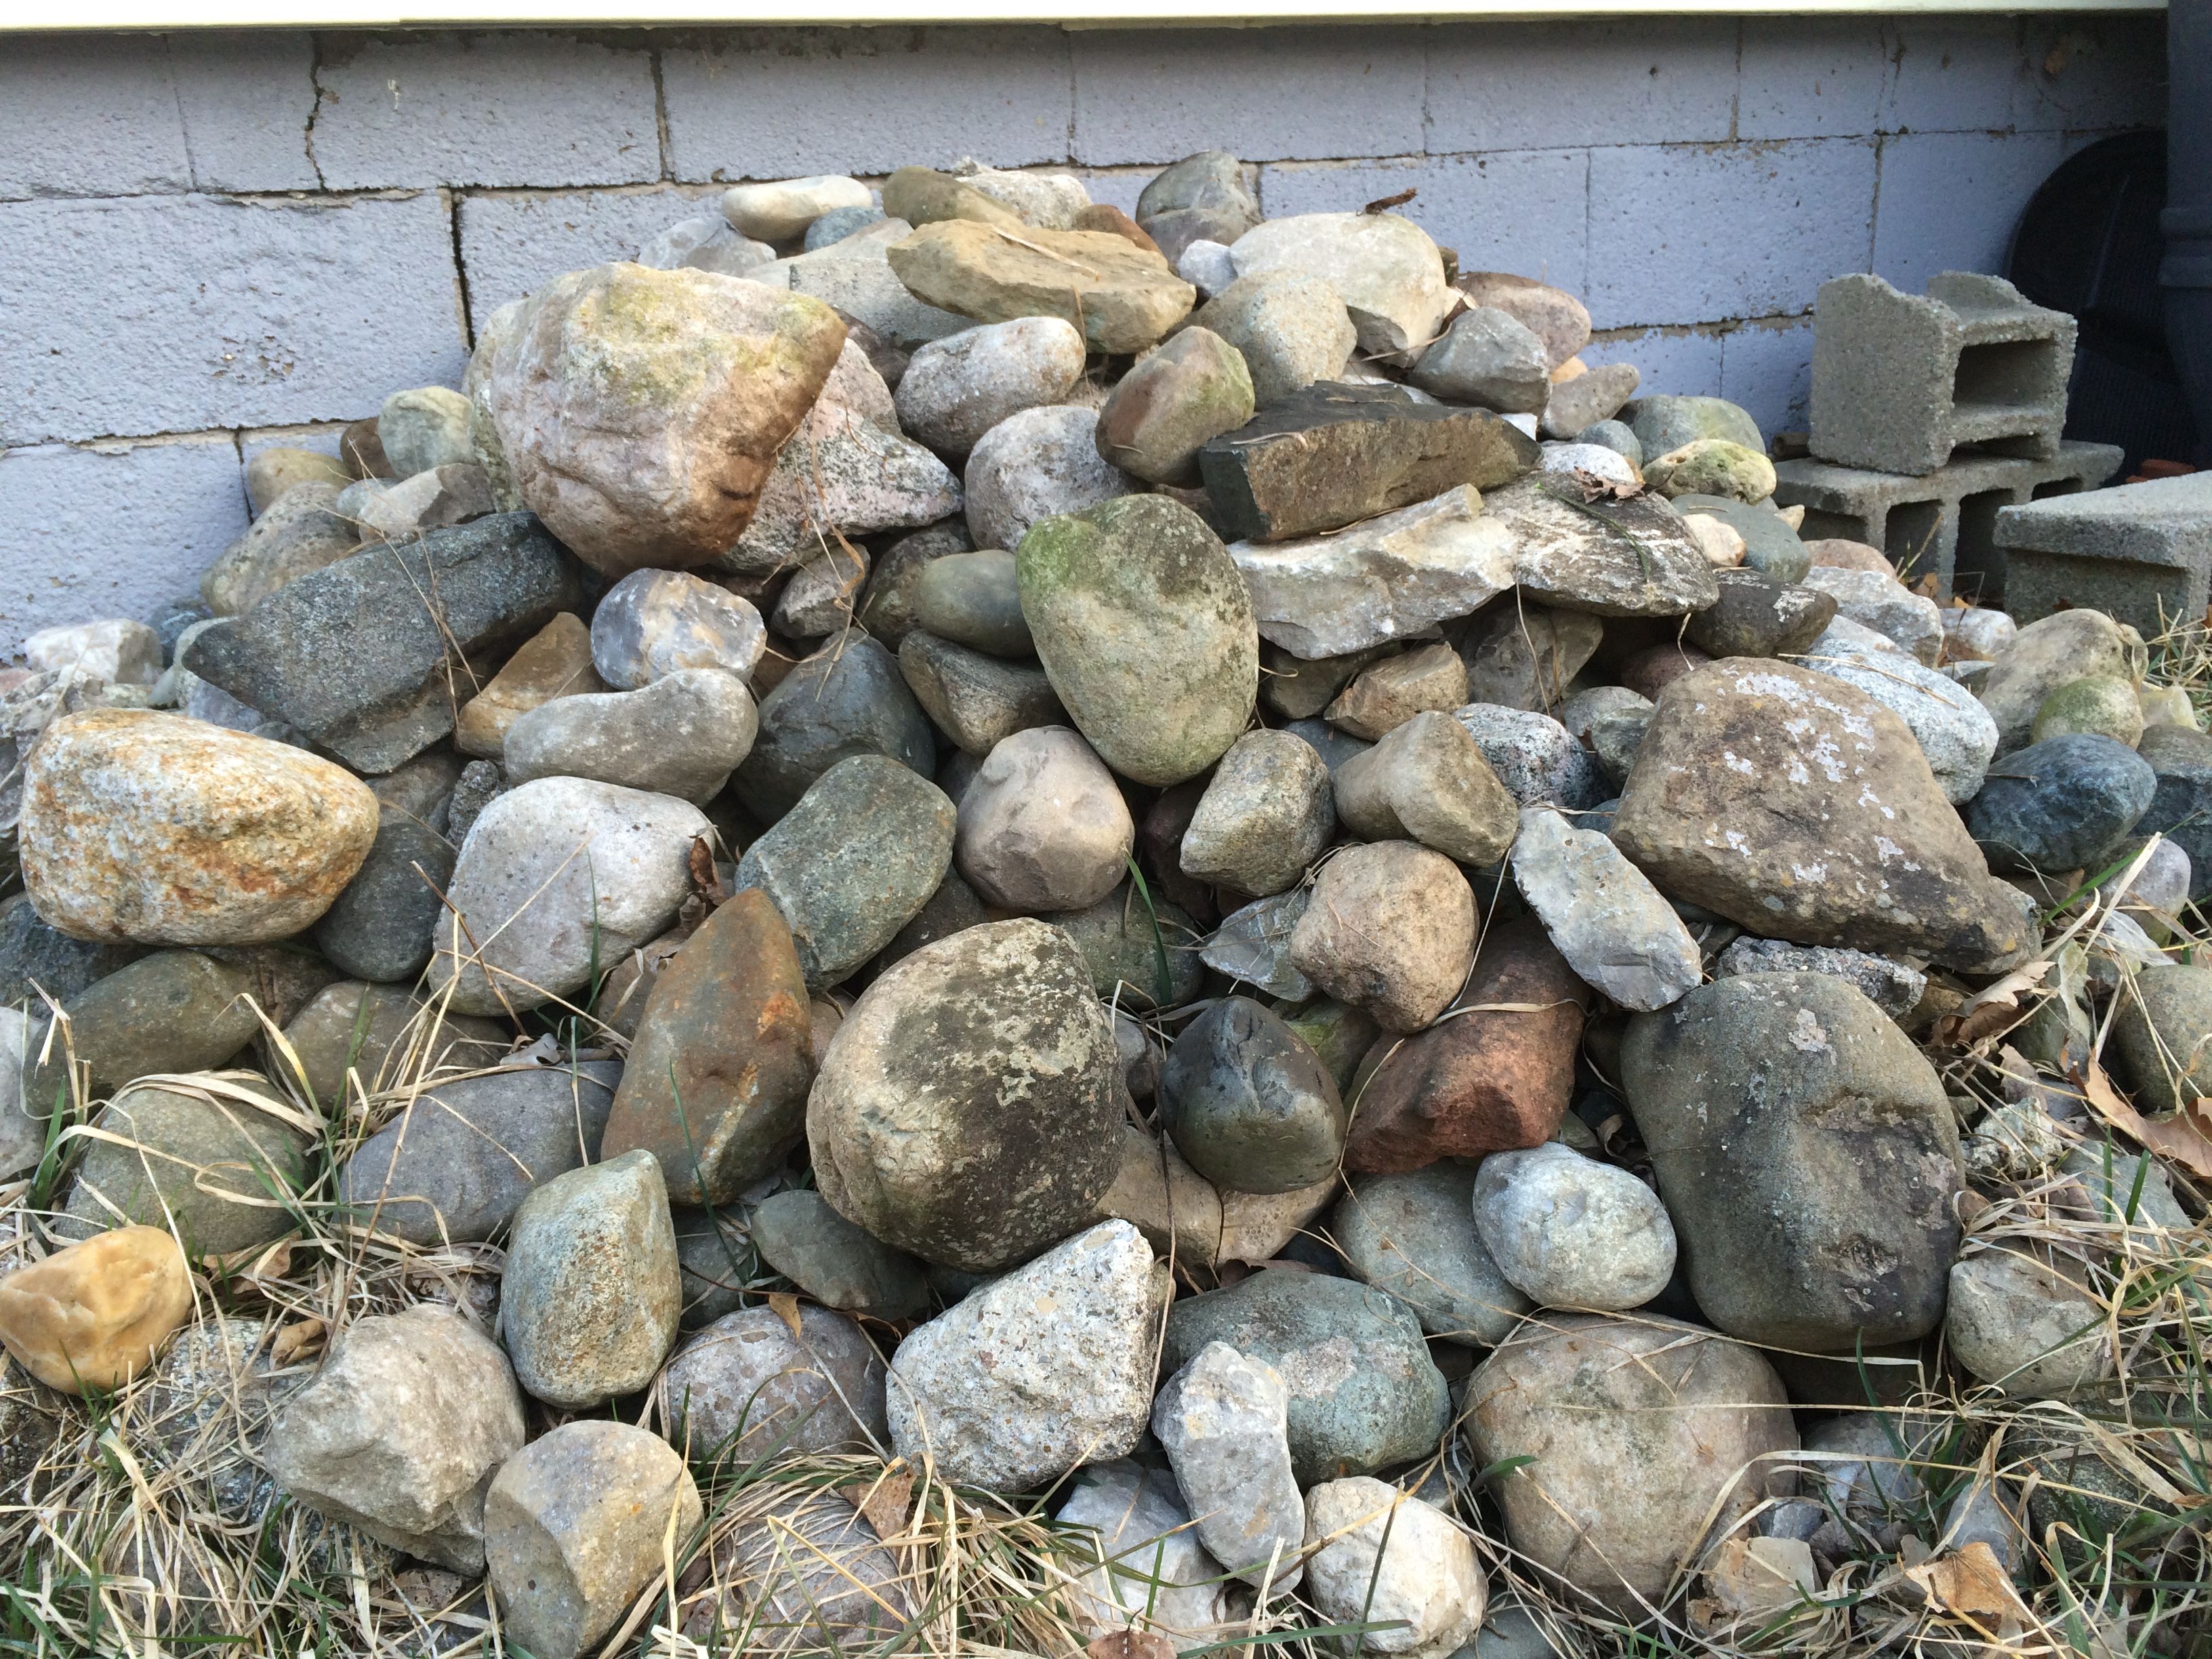 How Story Helped Me Sell a Pile of Rocks | Business Inspiration ...